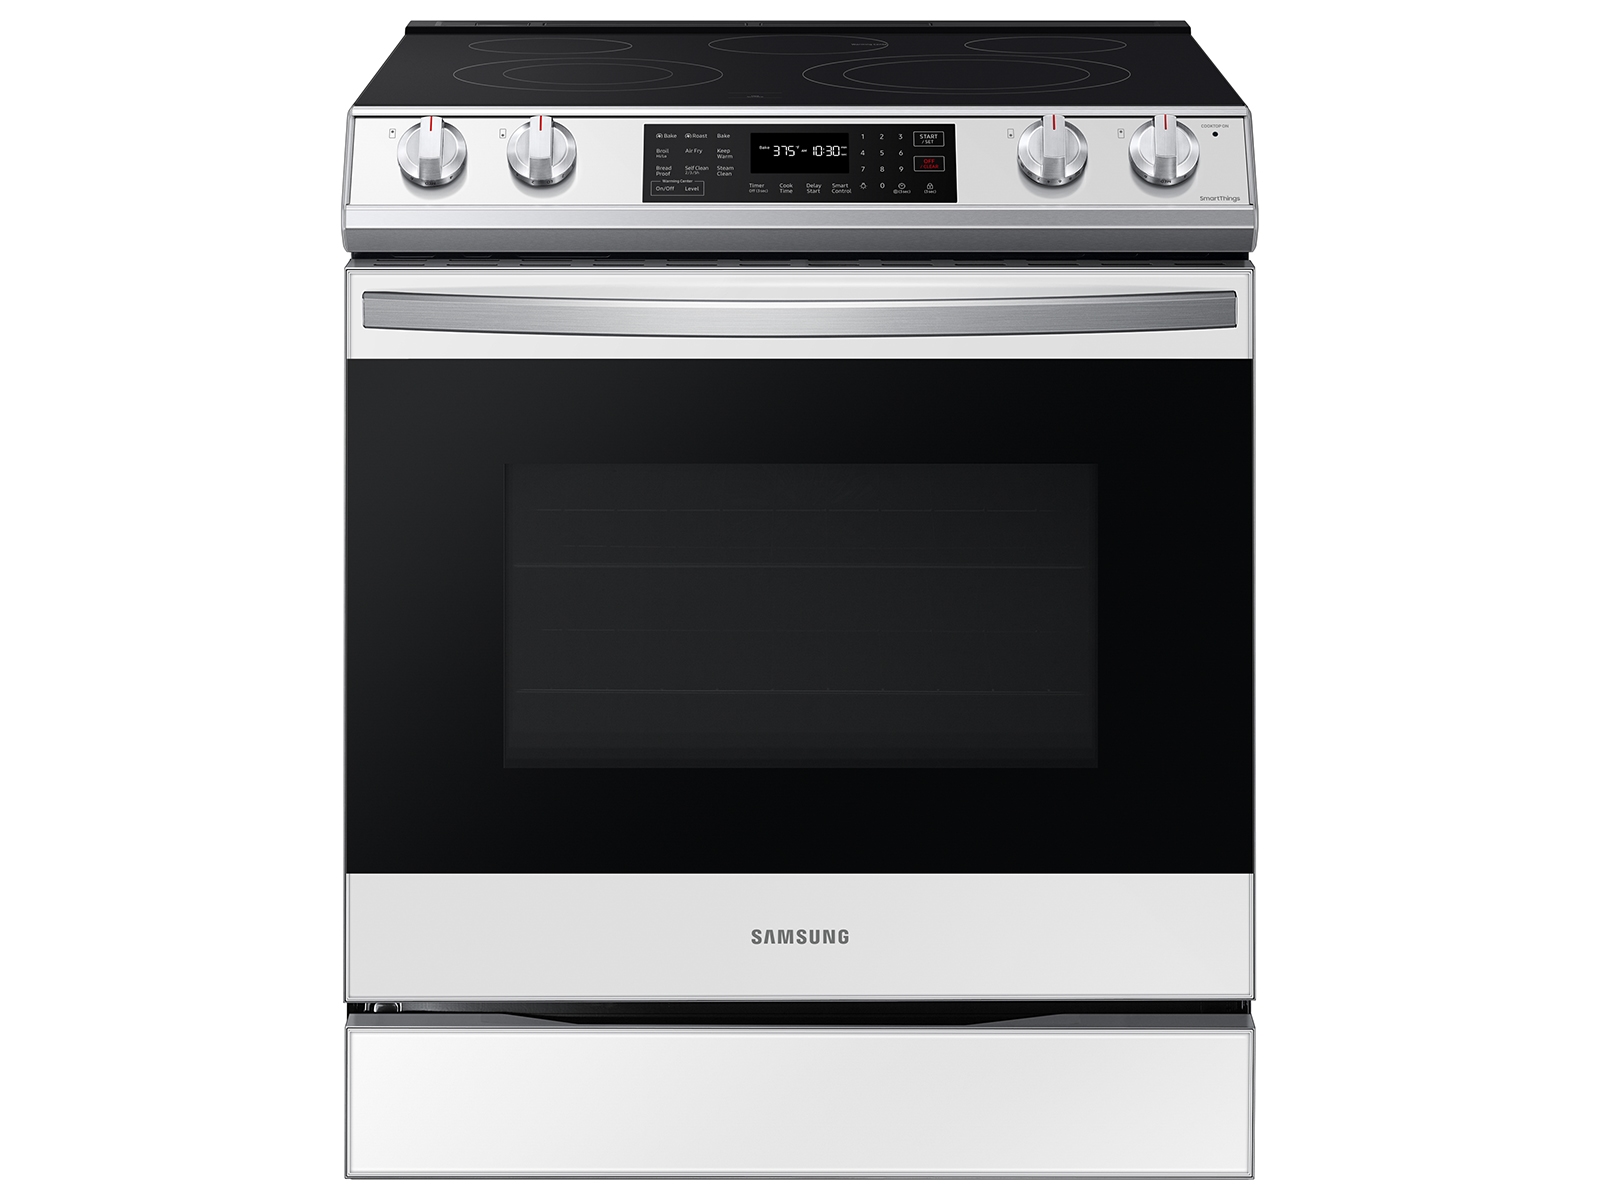 Photos - Cooker Samsung Bespoke 6.3 cu. ft. Smart Slide-in Electric Range with Air Fry & C 